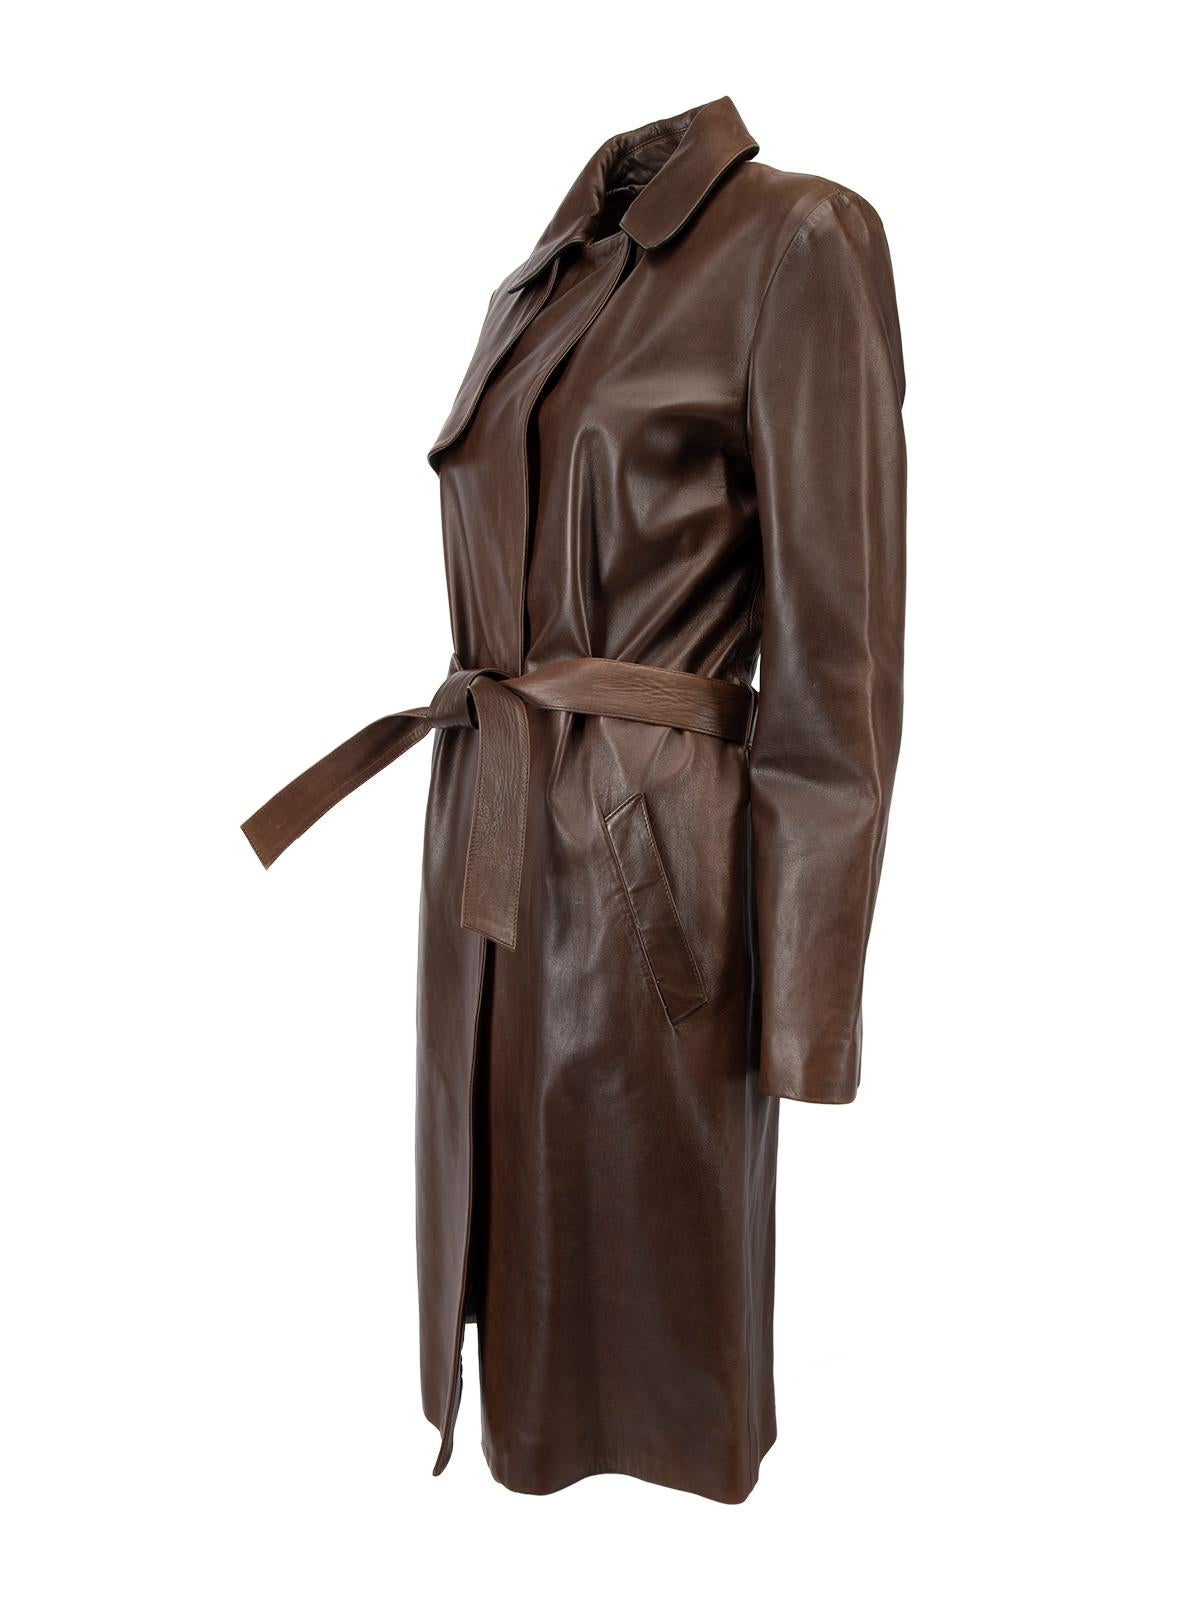 Pre-Loved Joseph Women's Brown Leather Belted Trench Coat 1